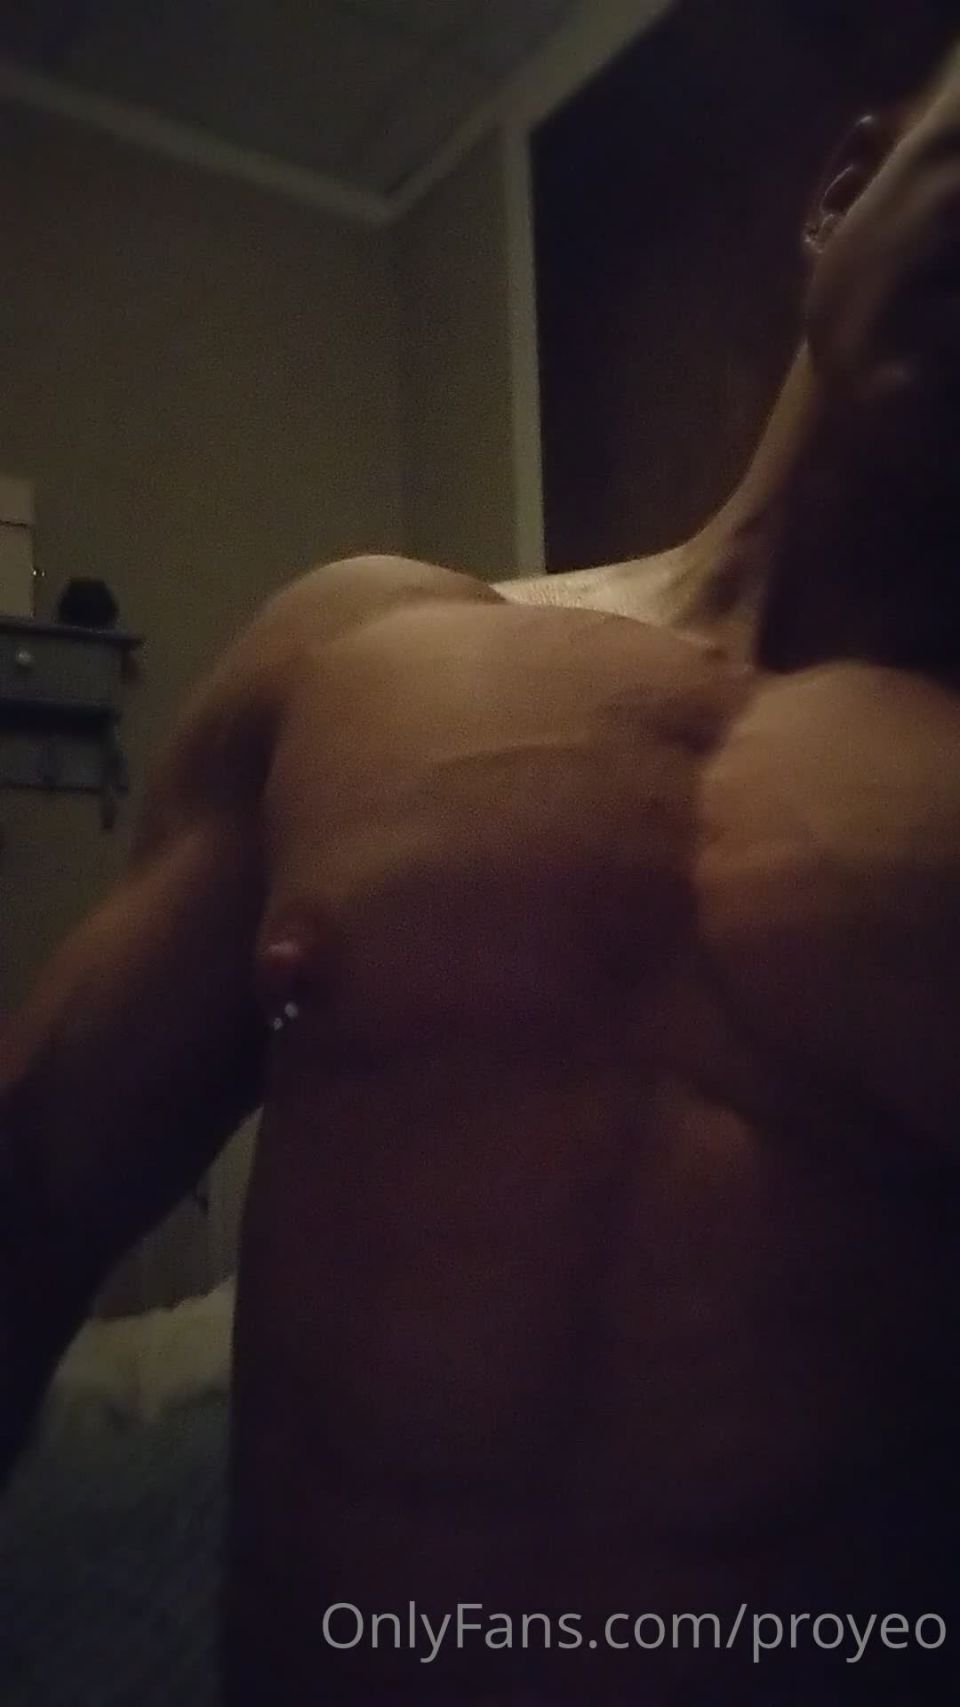 MuscleGeisha () Musclegeisha - ill be saying more soon though a bit blurry shot this vid right after my massage on 22-09-2020